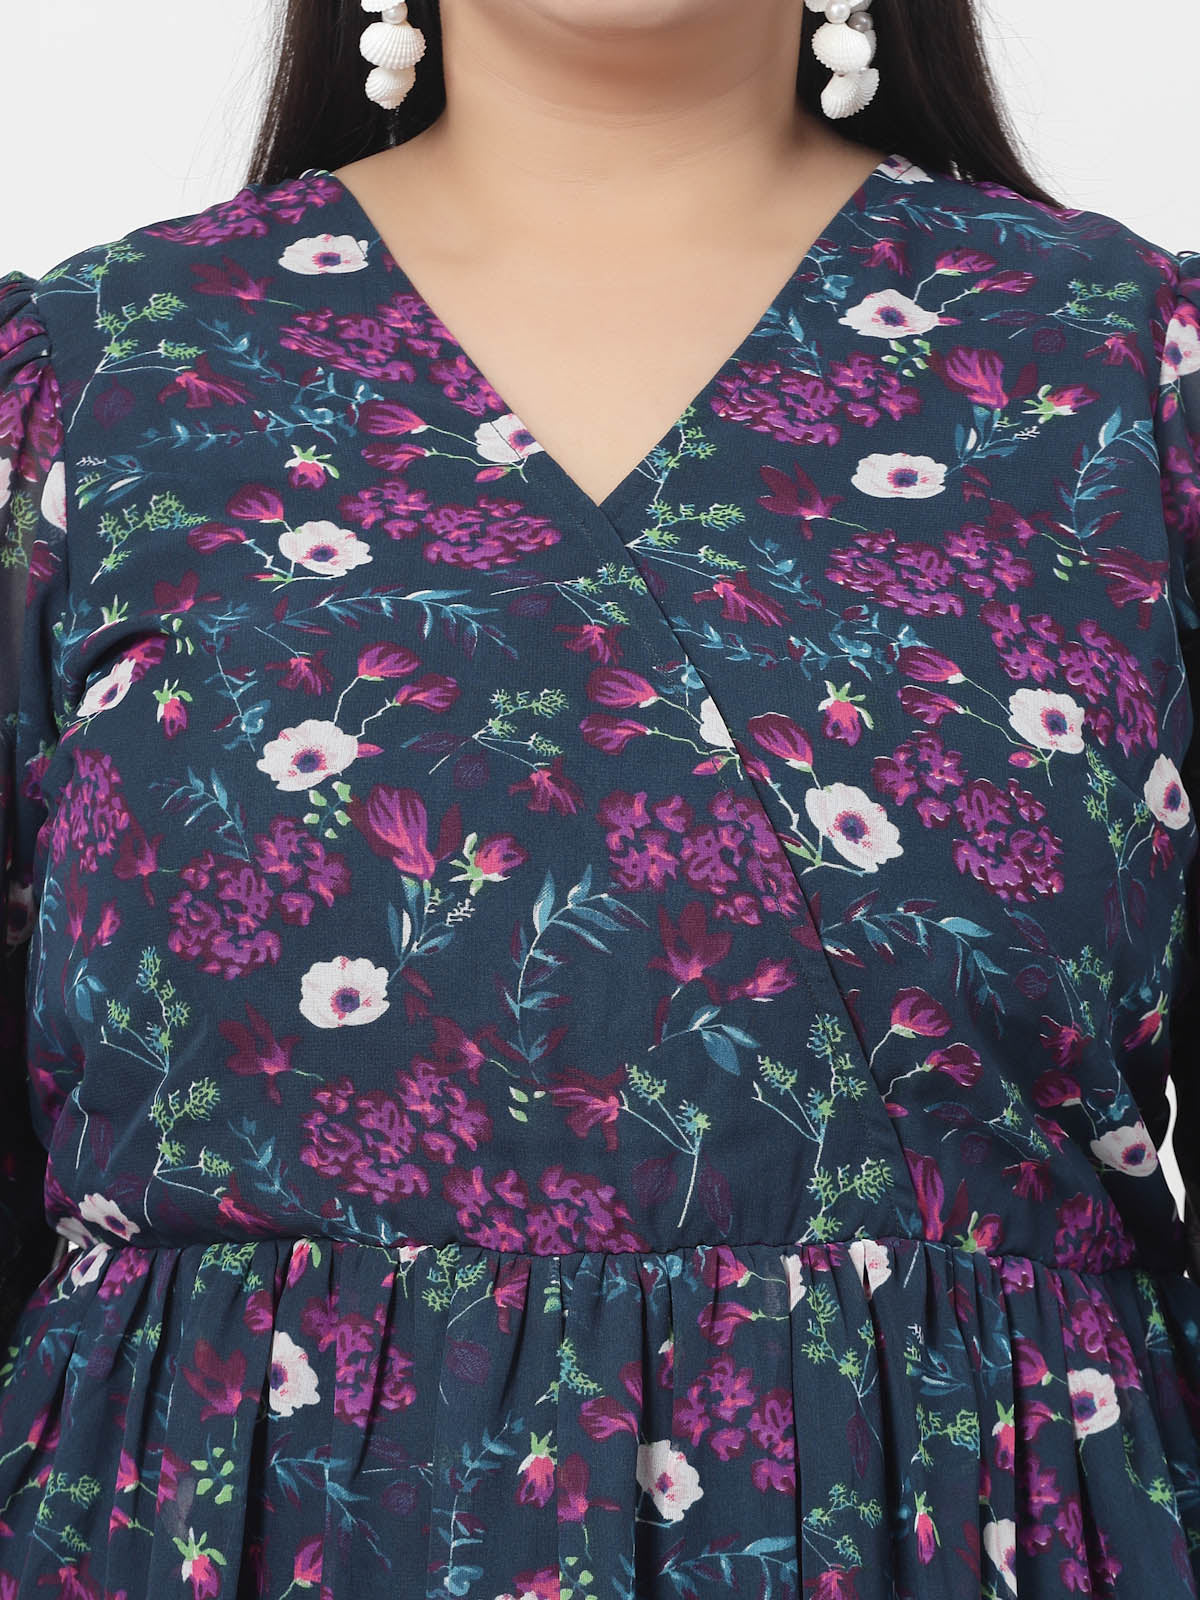 Plus Size Navy Blue, Pink & White Floral Printed Puff Sleeves Fit & Flare Maxi Dress